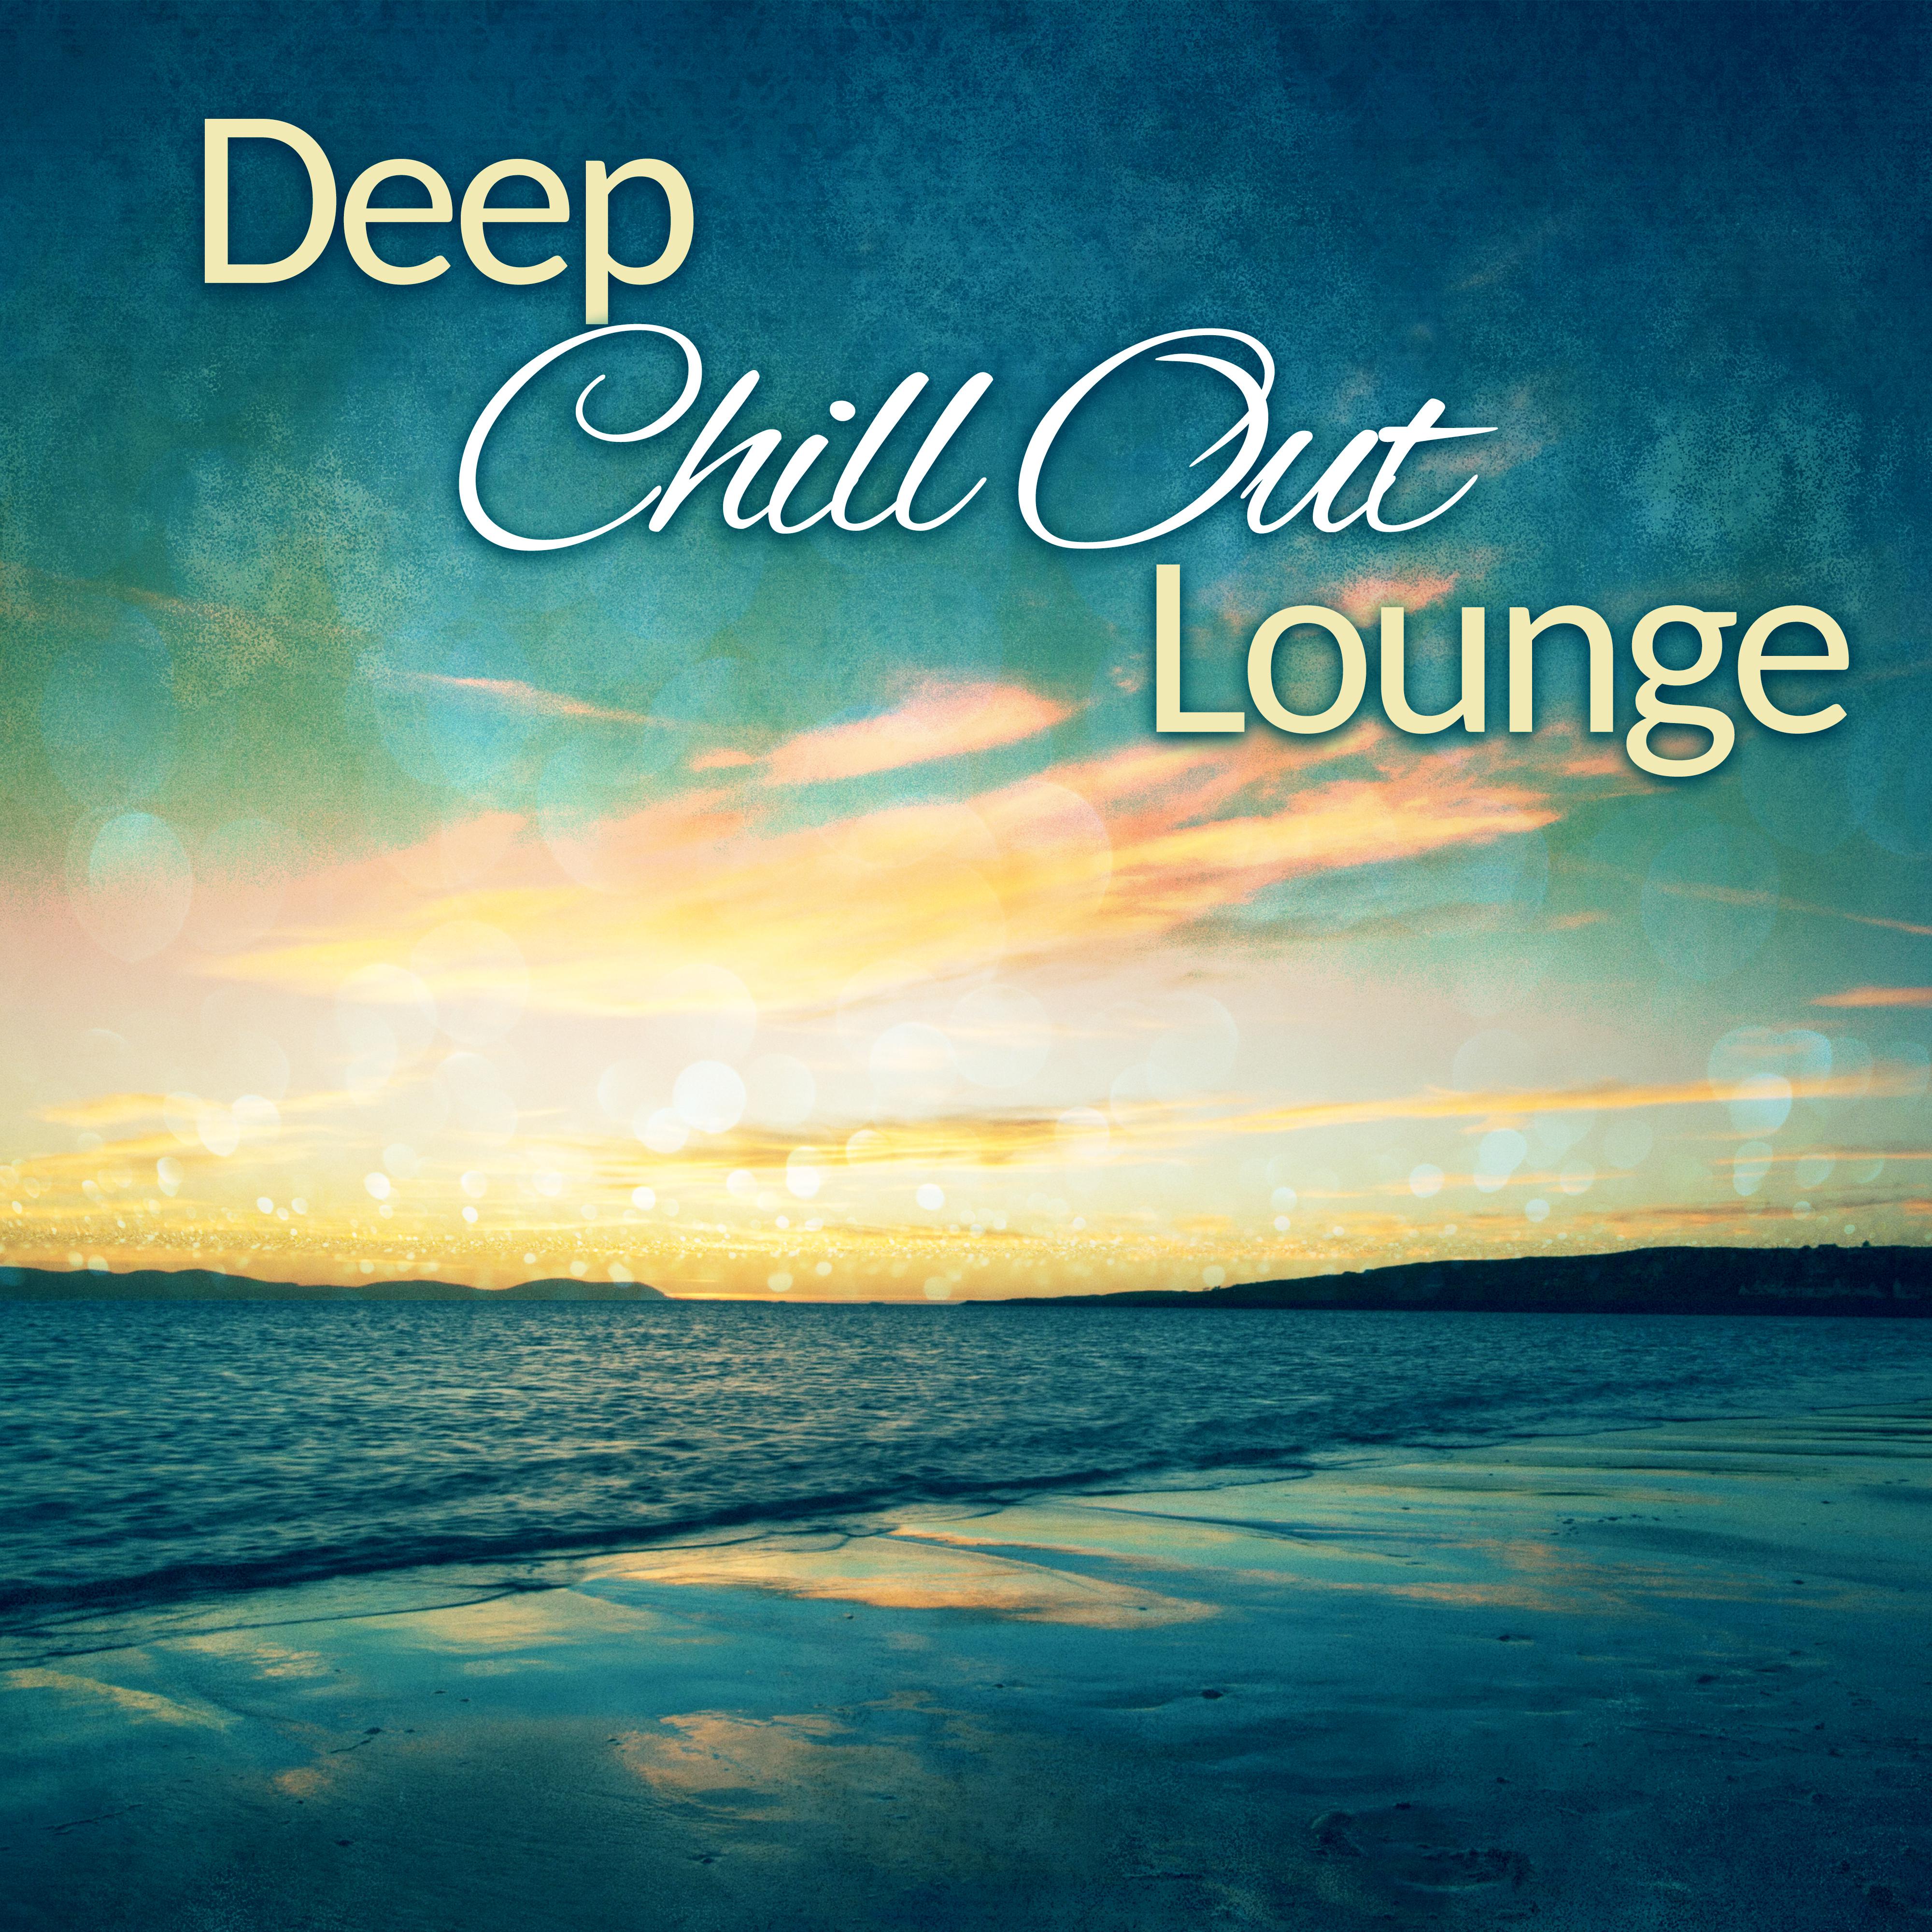 Deep Chill Out Lounge  Relaxing Sounds, Beach House, Ibiza Lounge, Holiday Music